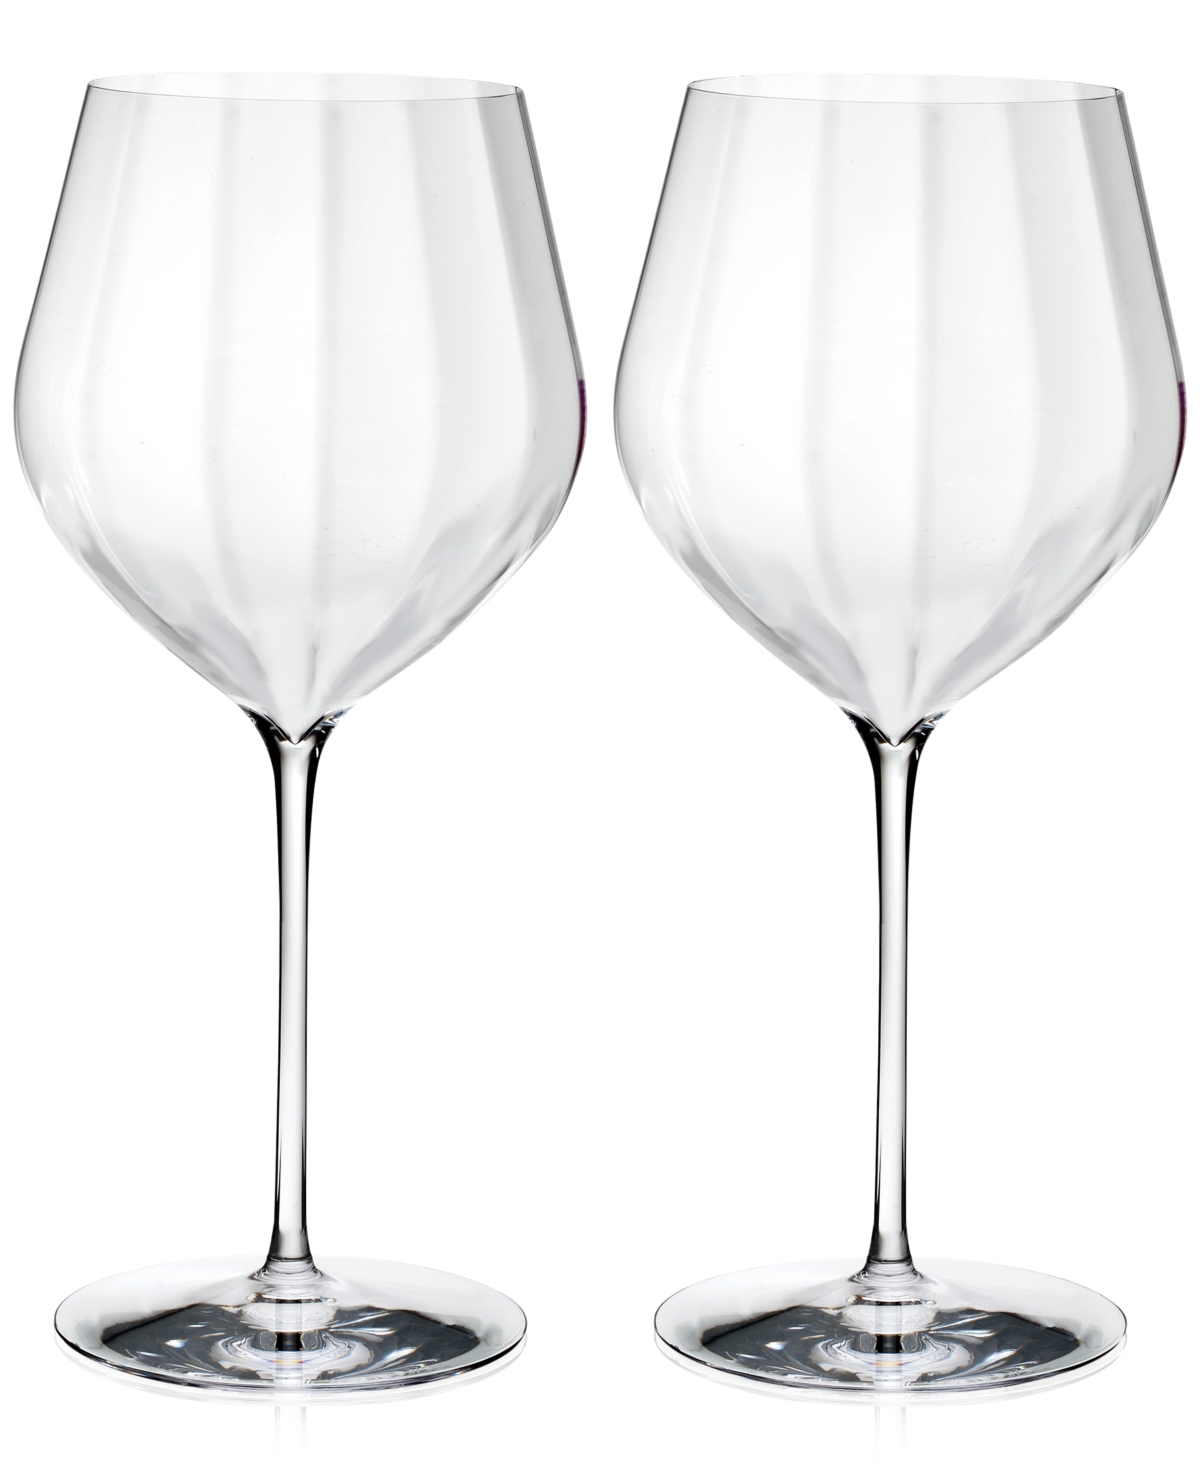 Waterford Elegance Optic Cabernet Sauvignon Glass Pair In No Color